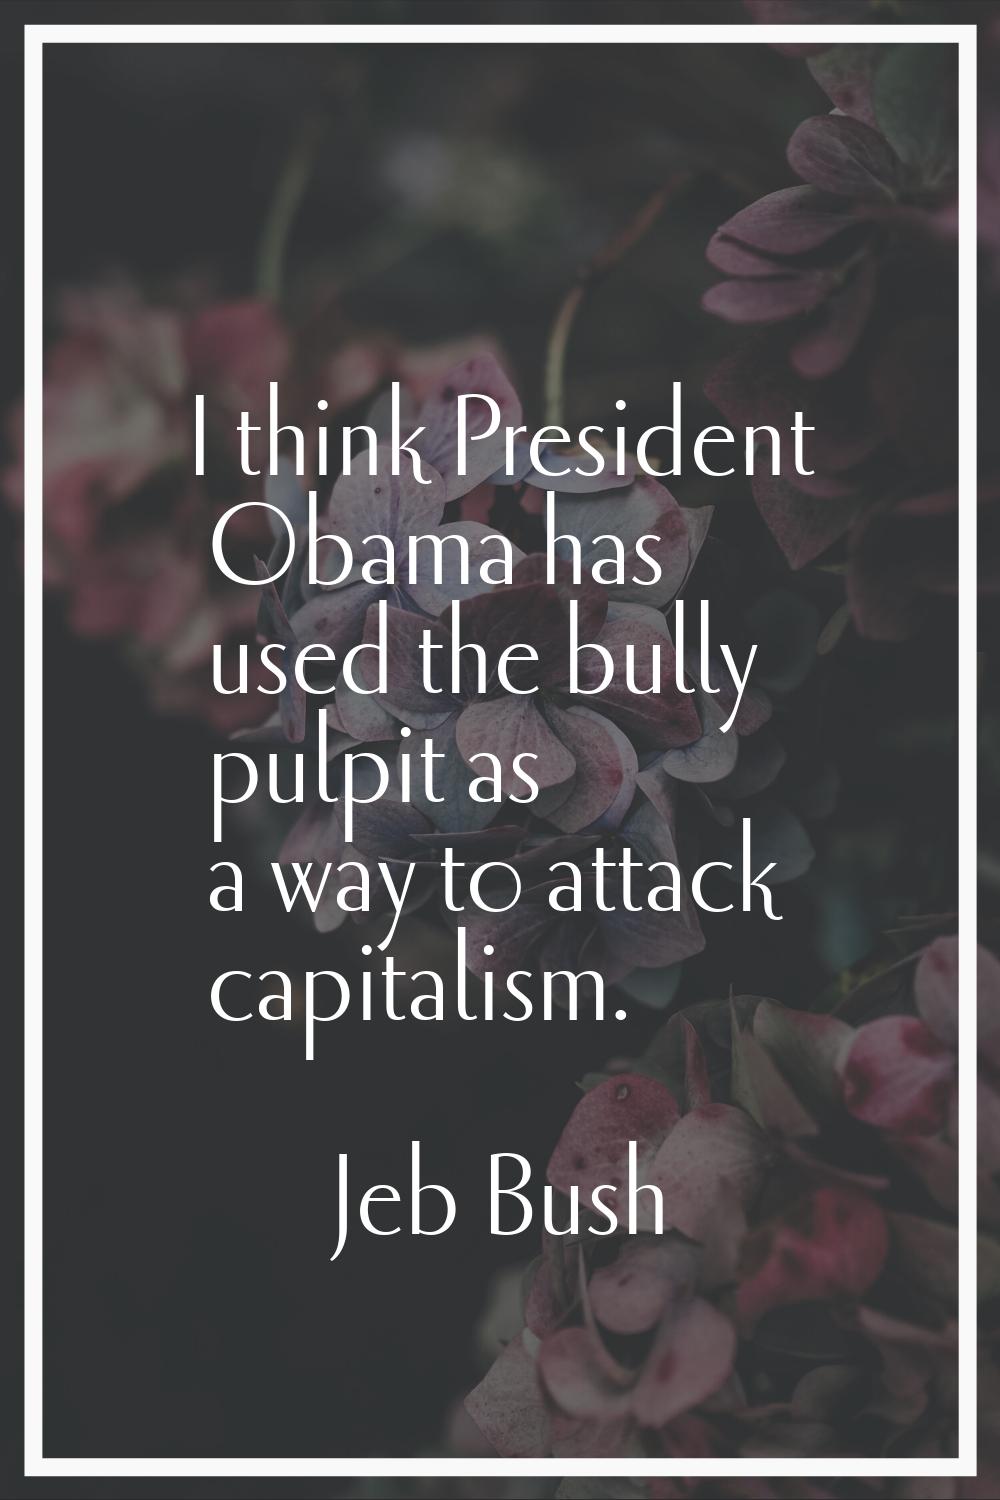 I think President Obama has used the bully pulpit as a way to attack capitalism.